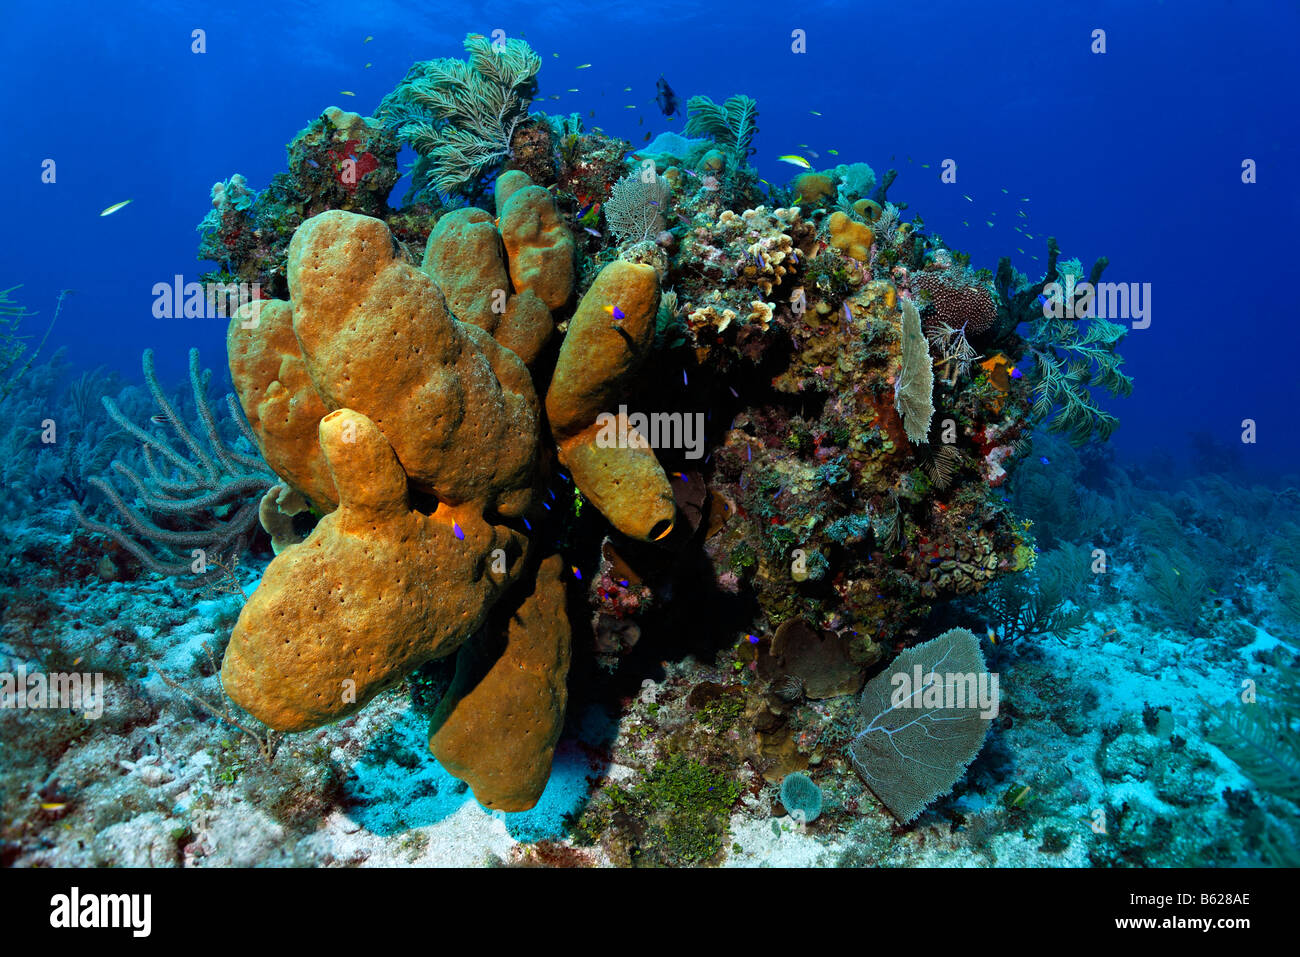 Block of coral with Brown Tube Sponges (Agelas conifera) and diverse corals, Turneffe Atoll, Belize, Central America, Caribbean Stock Photo